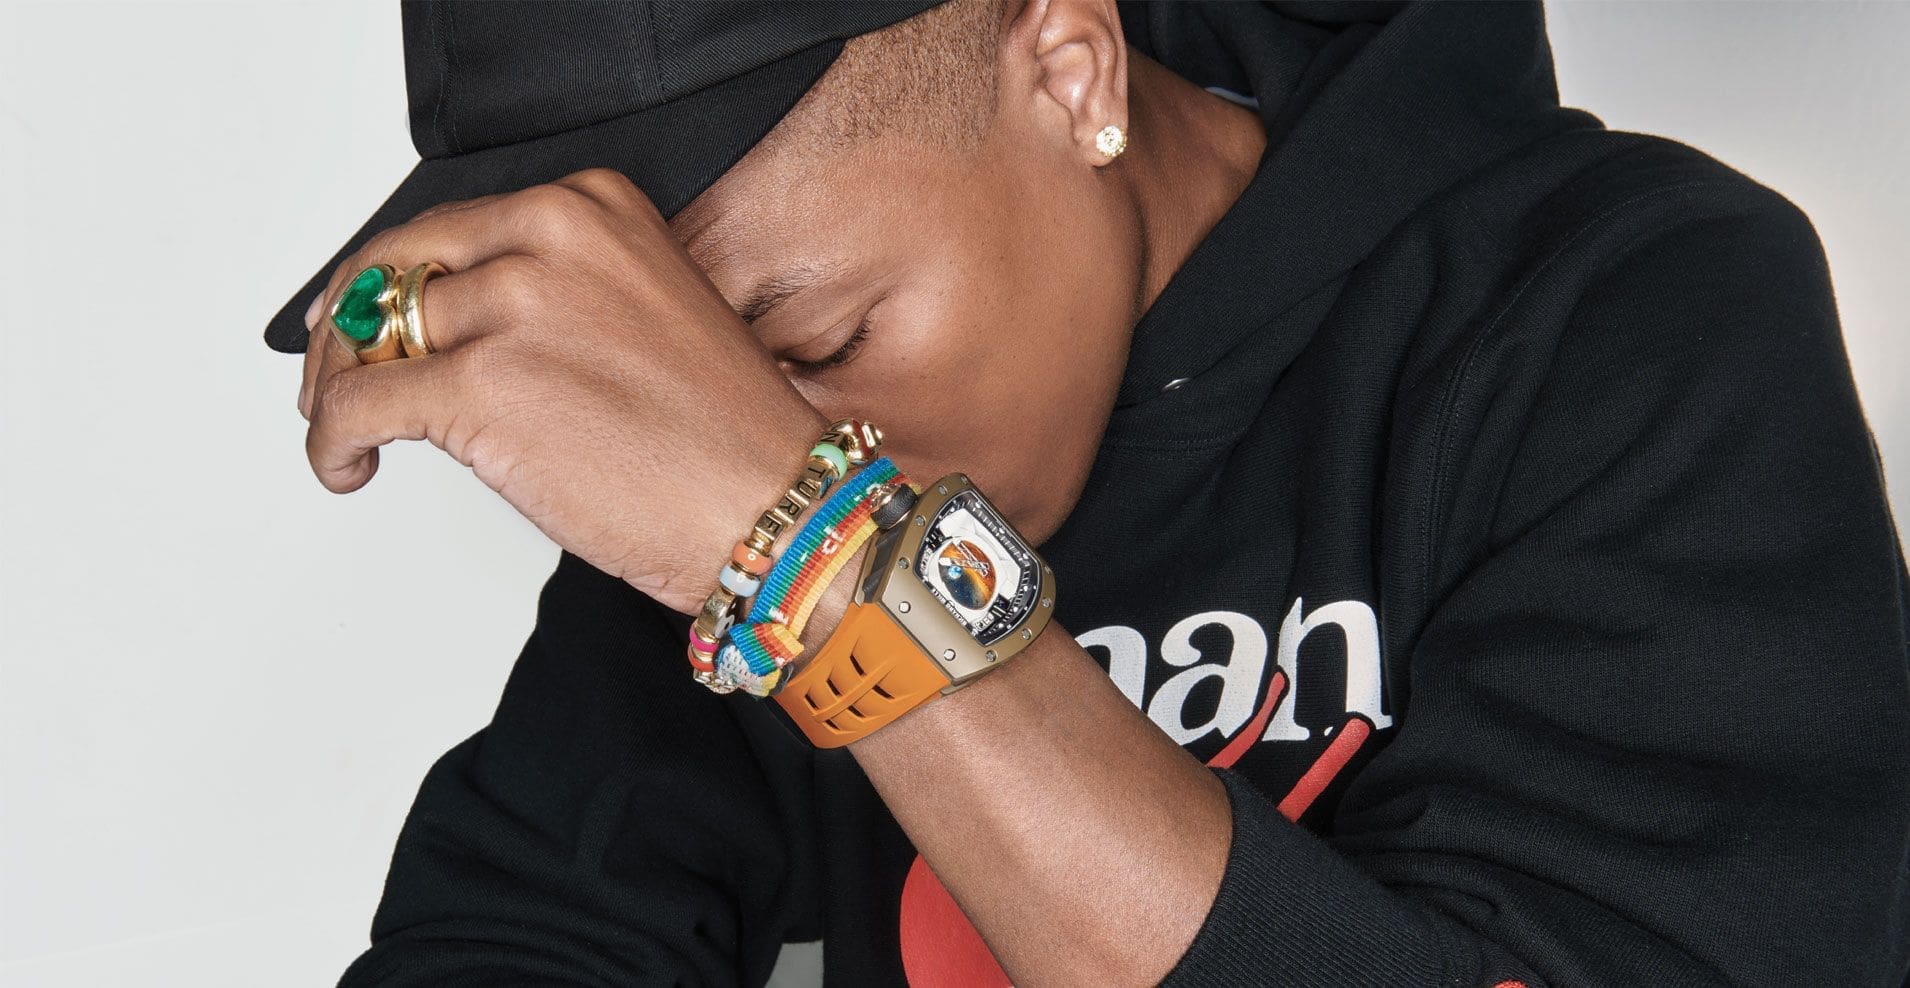 Pharrell as Louis Vuitton creative director may bring horological influence